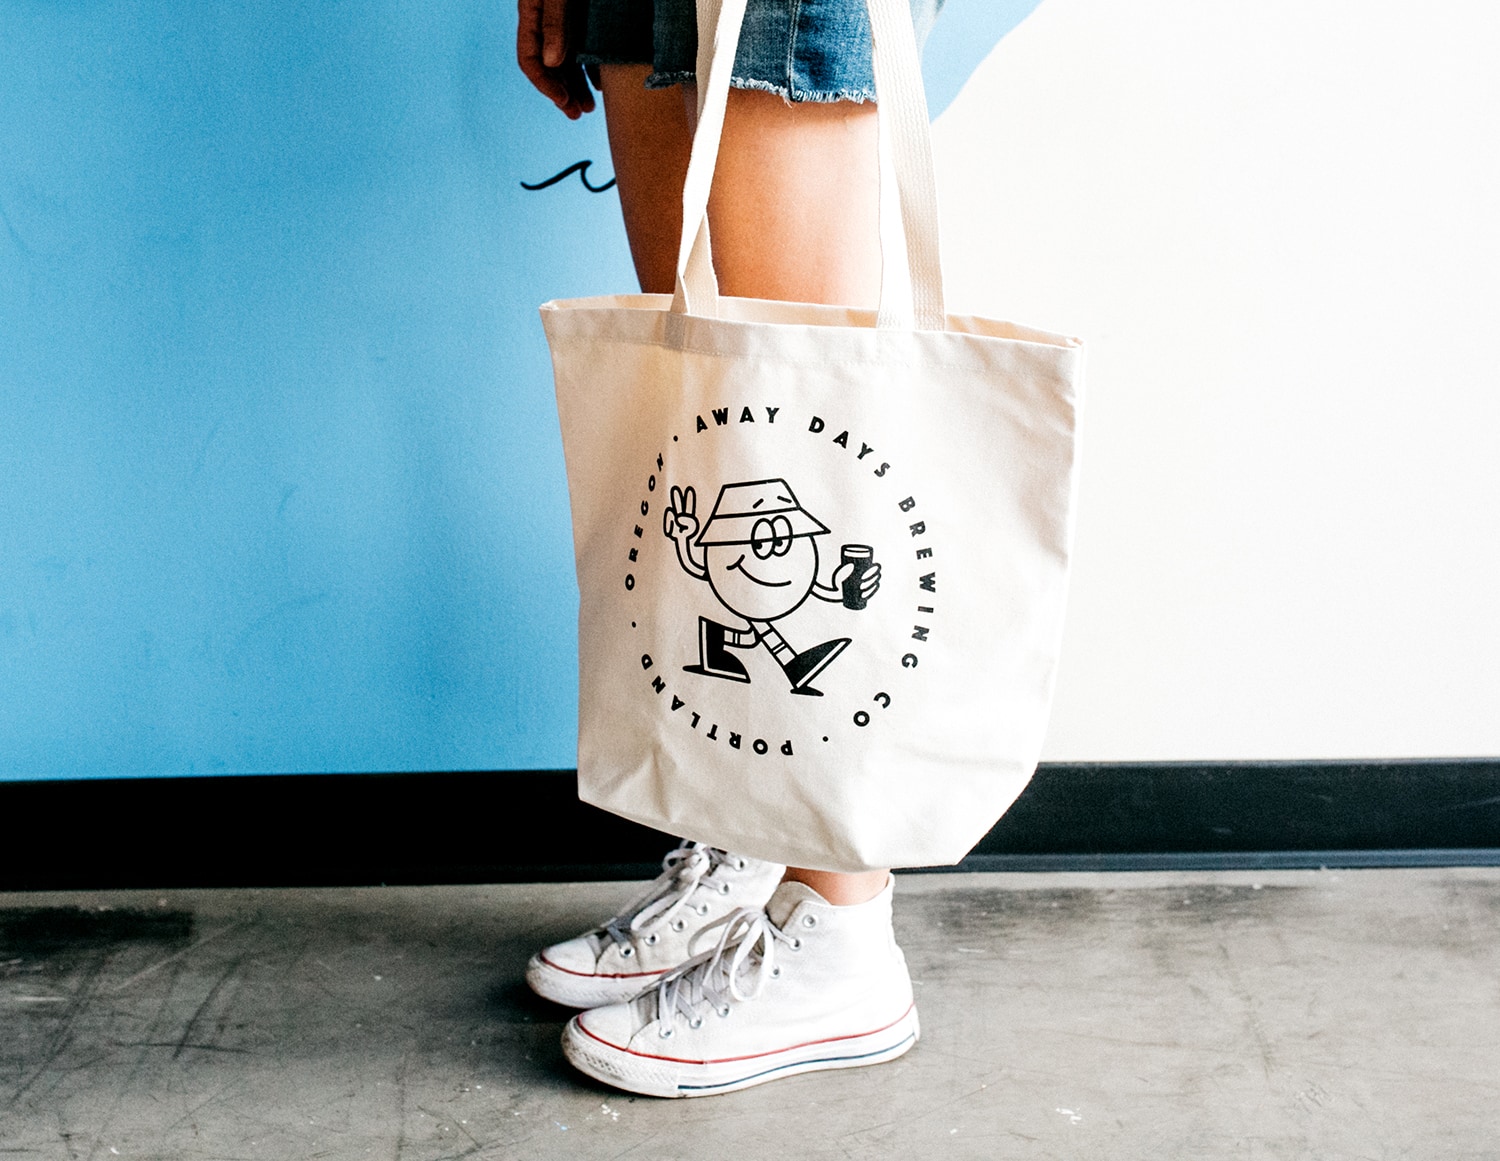 Away Days Brewing Co. Packing tote bag